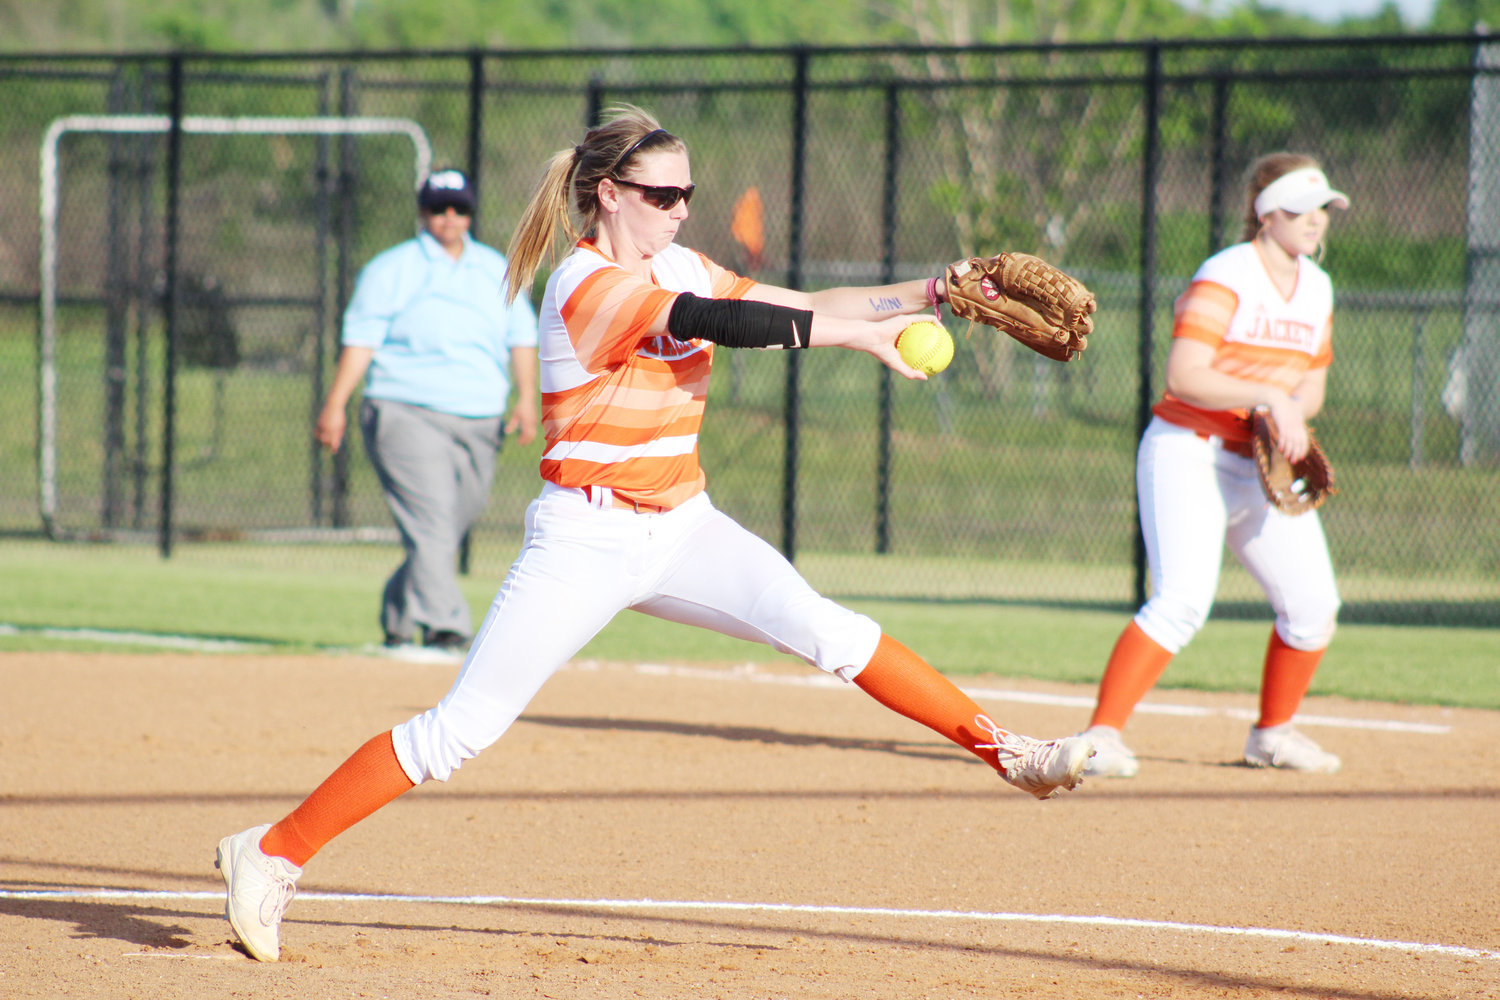 Mineola pitcher Sydnie Bell tossed a 10-0 shutout over Quitman last Friday.  (Monitor photo by Briana Harmon)